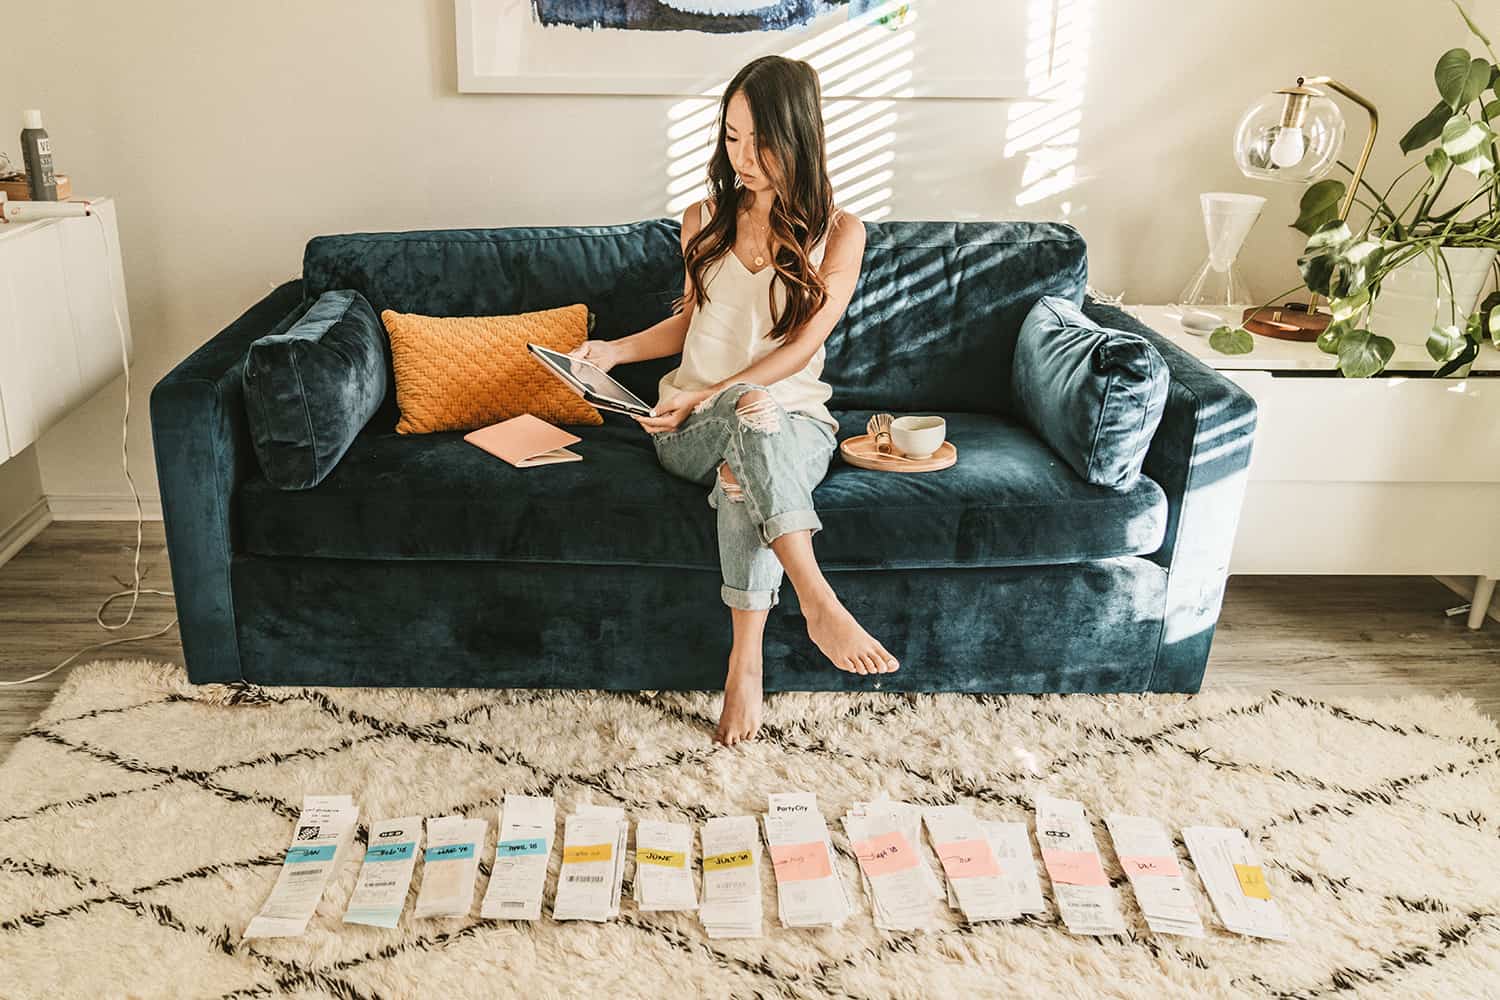 How to organize receipts for tax deductions